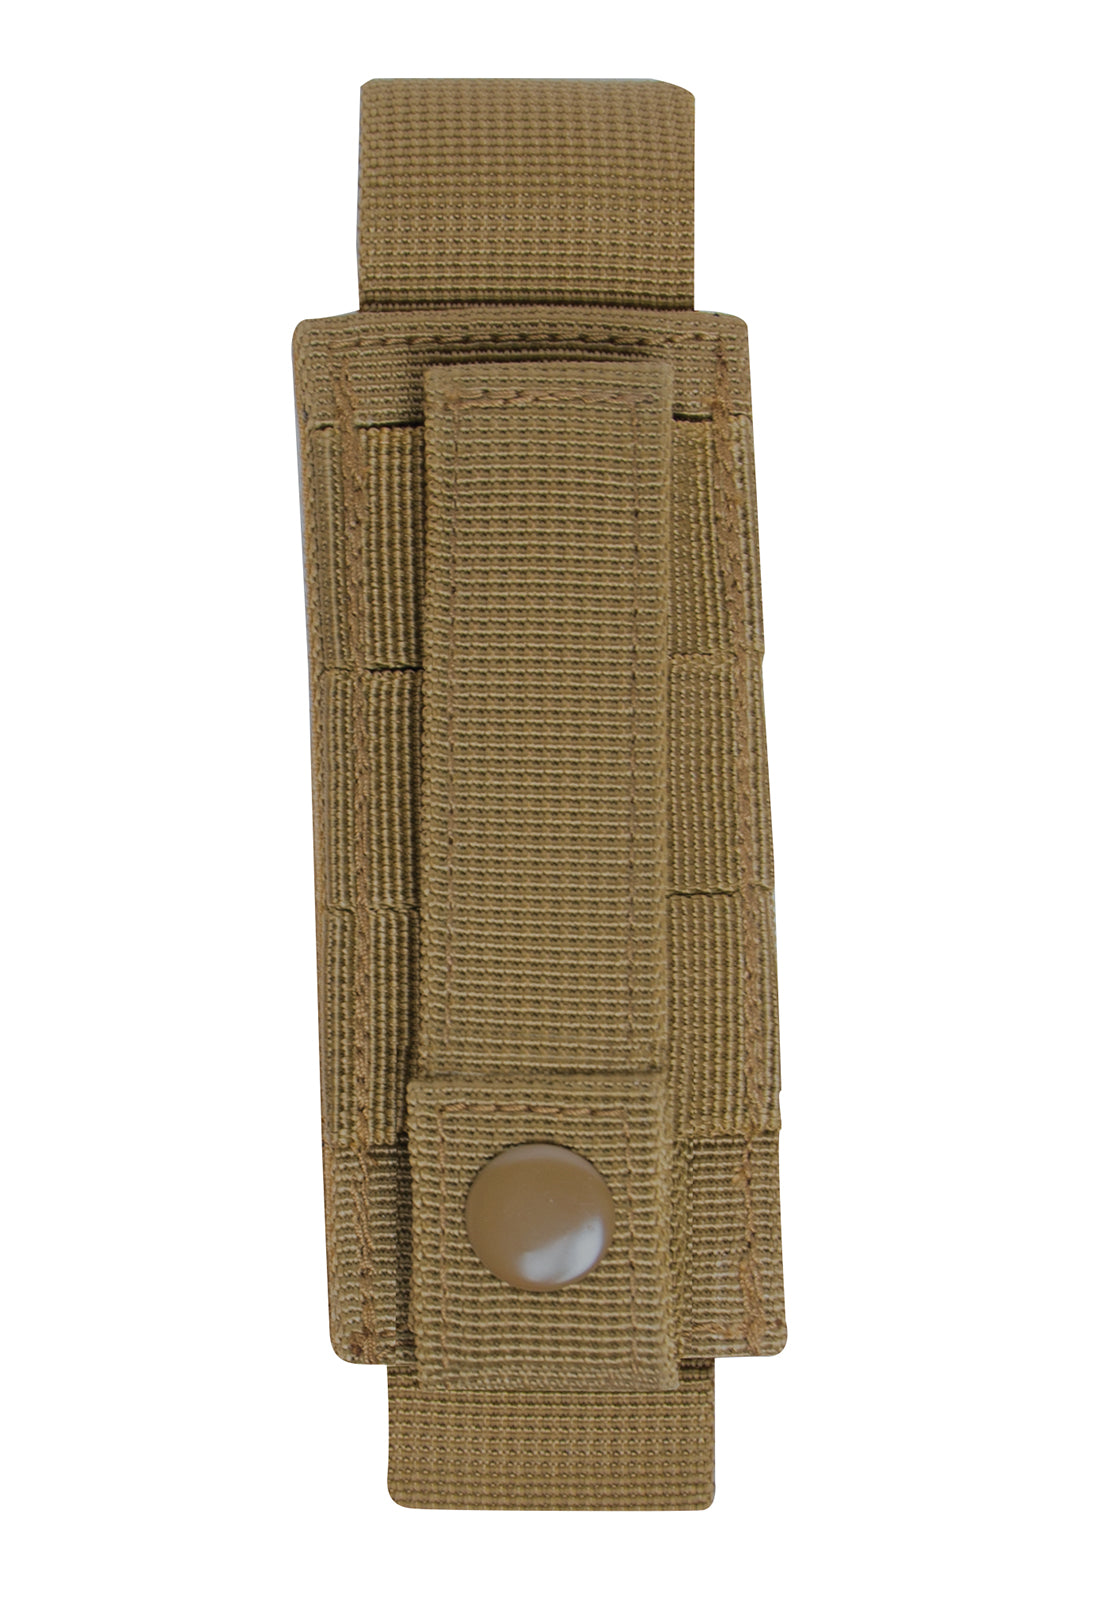 Rothco MOLLE Pepper Spray Pouch - Tactical Choice Plus